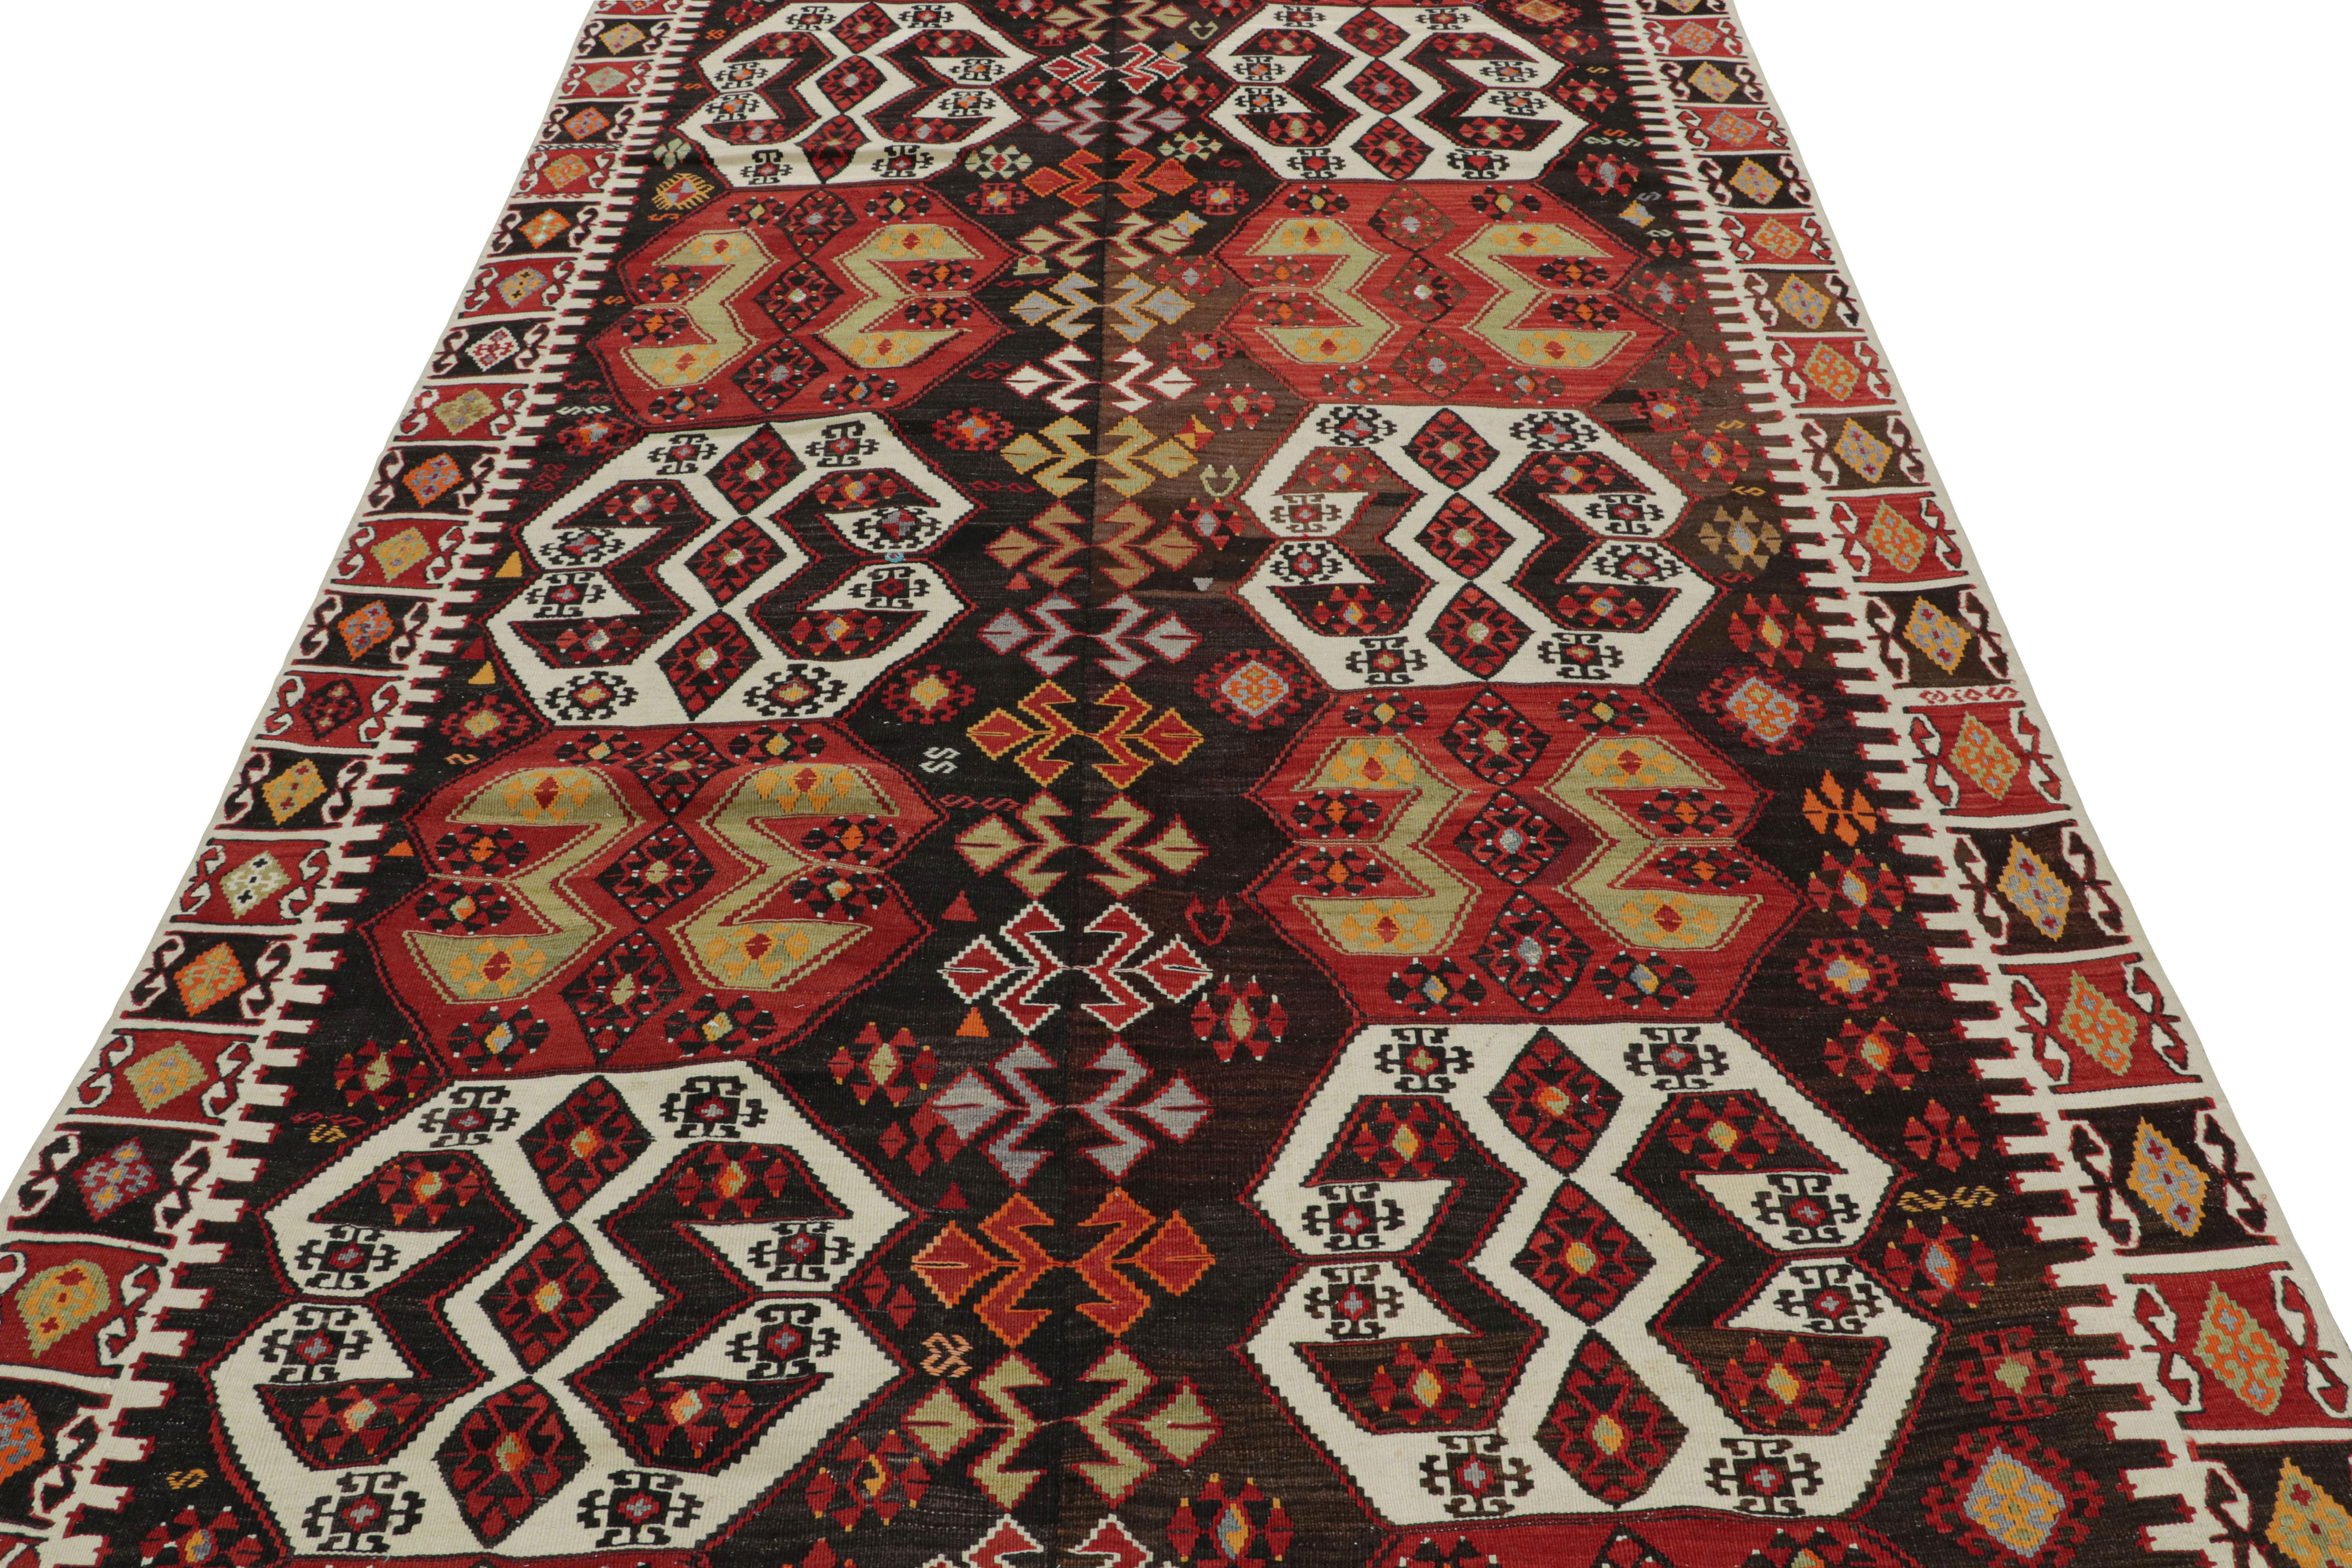 Vintage Midcentury Malatya Red and Off-White Wool Kilim Rug by Rug & Kilim In Good Condition For Sale In Long Island City, NY